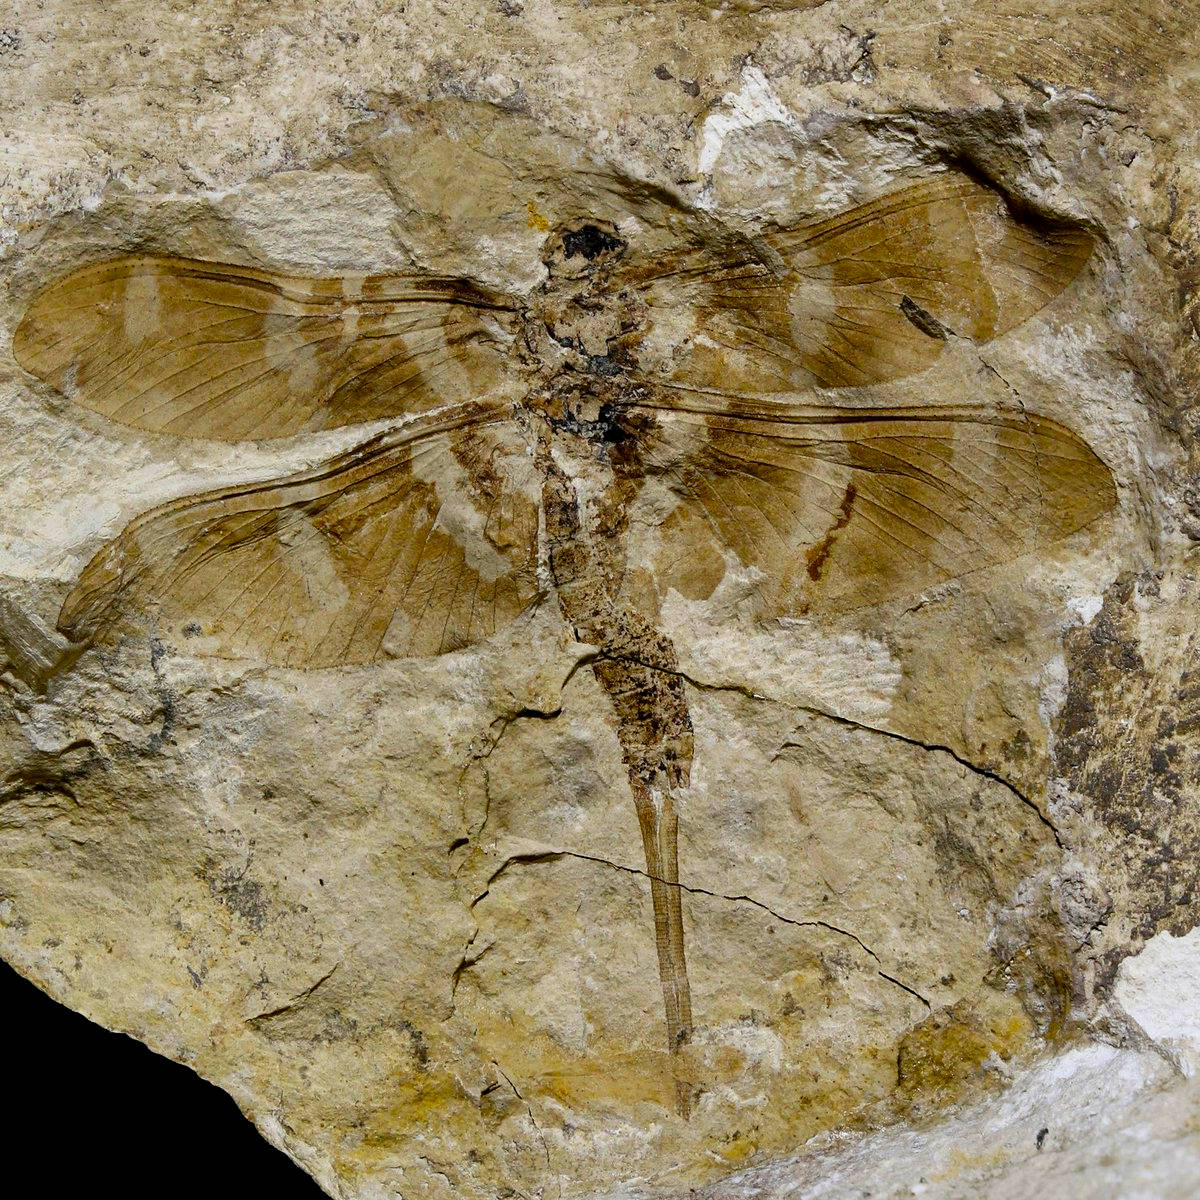 For  #FossilFriday meet Dunbaria! This ~285 million year old insects is wonderfully preserved: you can even see bands of colour on the wings. It's a member of an extinct group called the Palaeodictyoptera. These early insects are super cool. /n